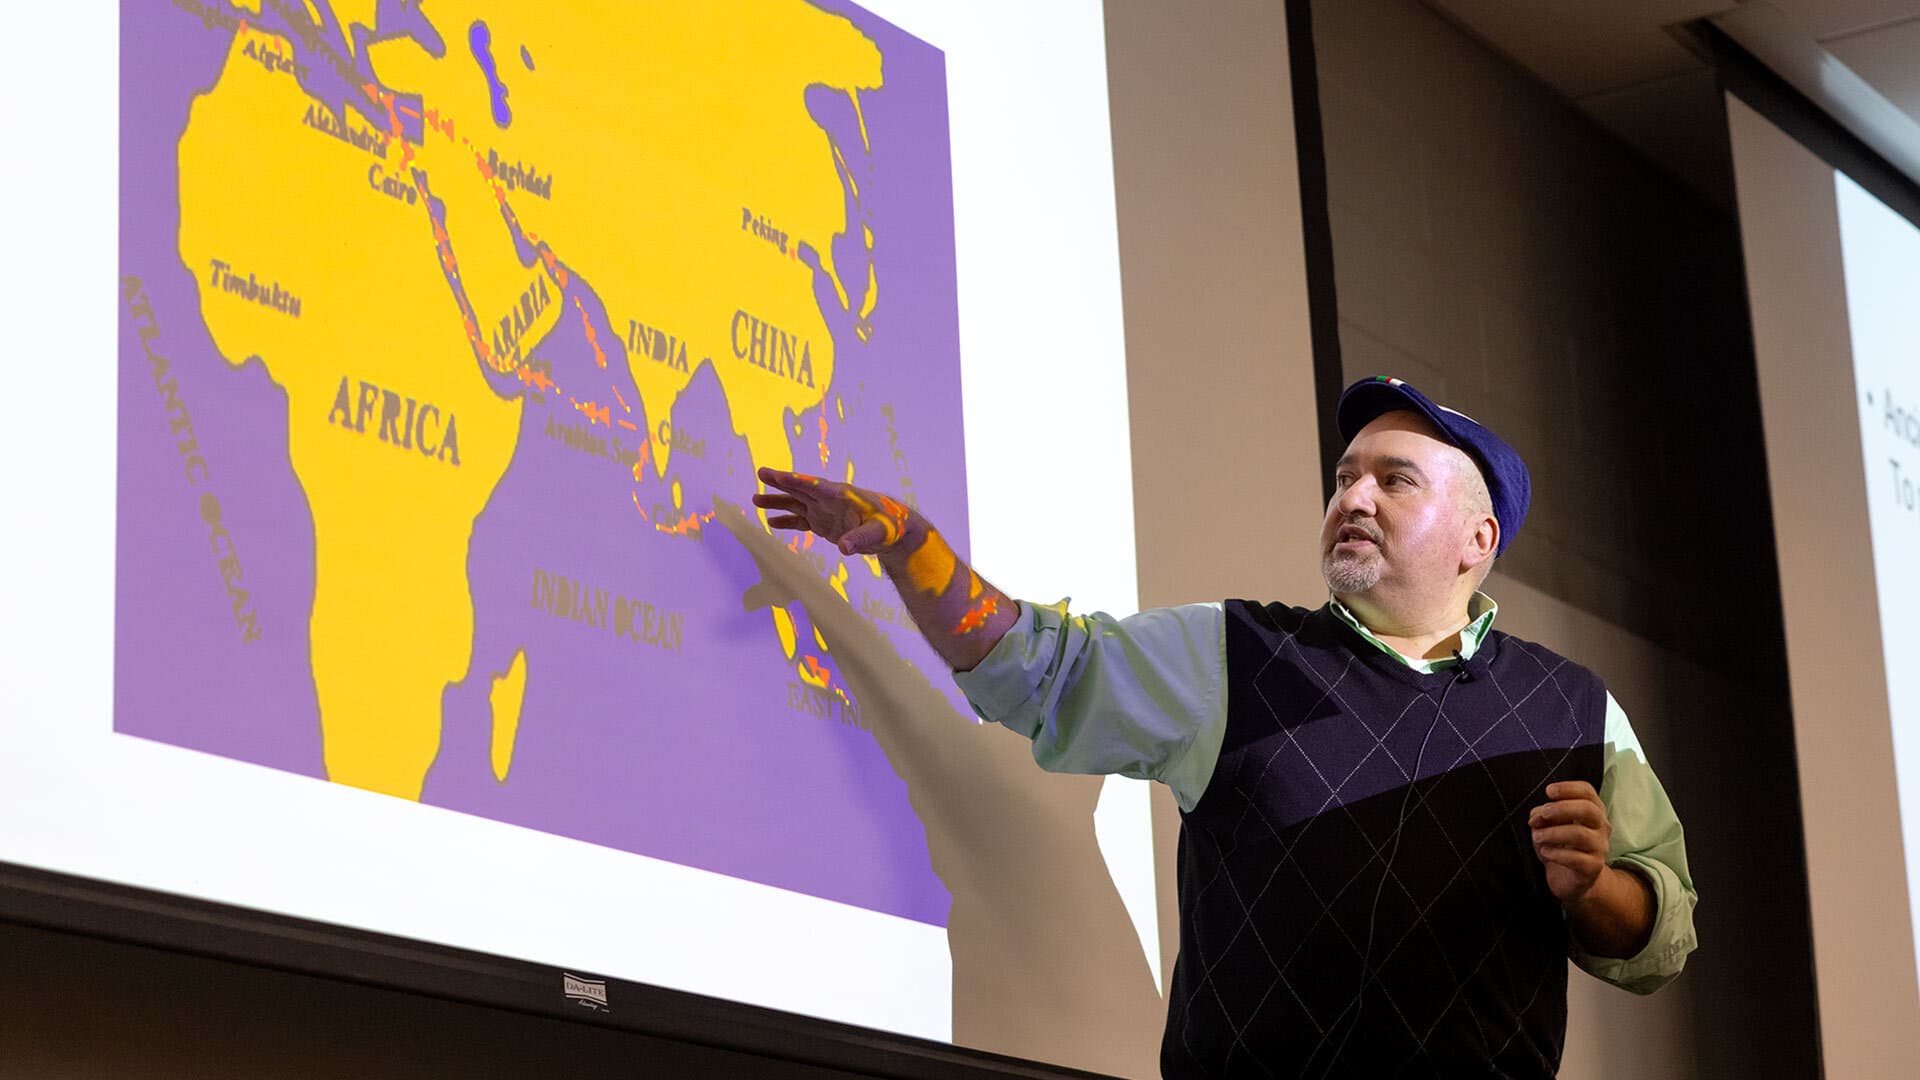 A professor teaches in front of a screen with a world map